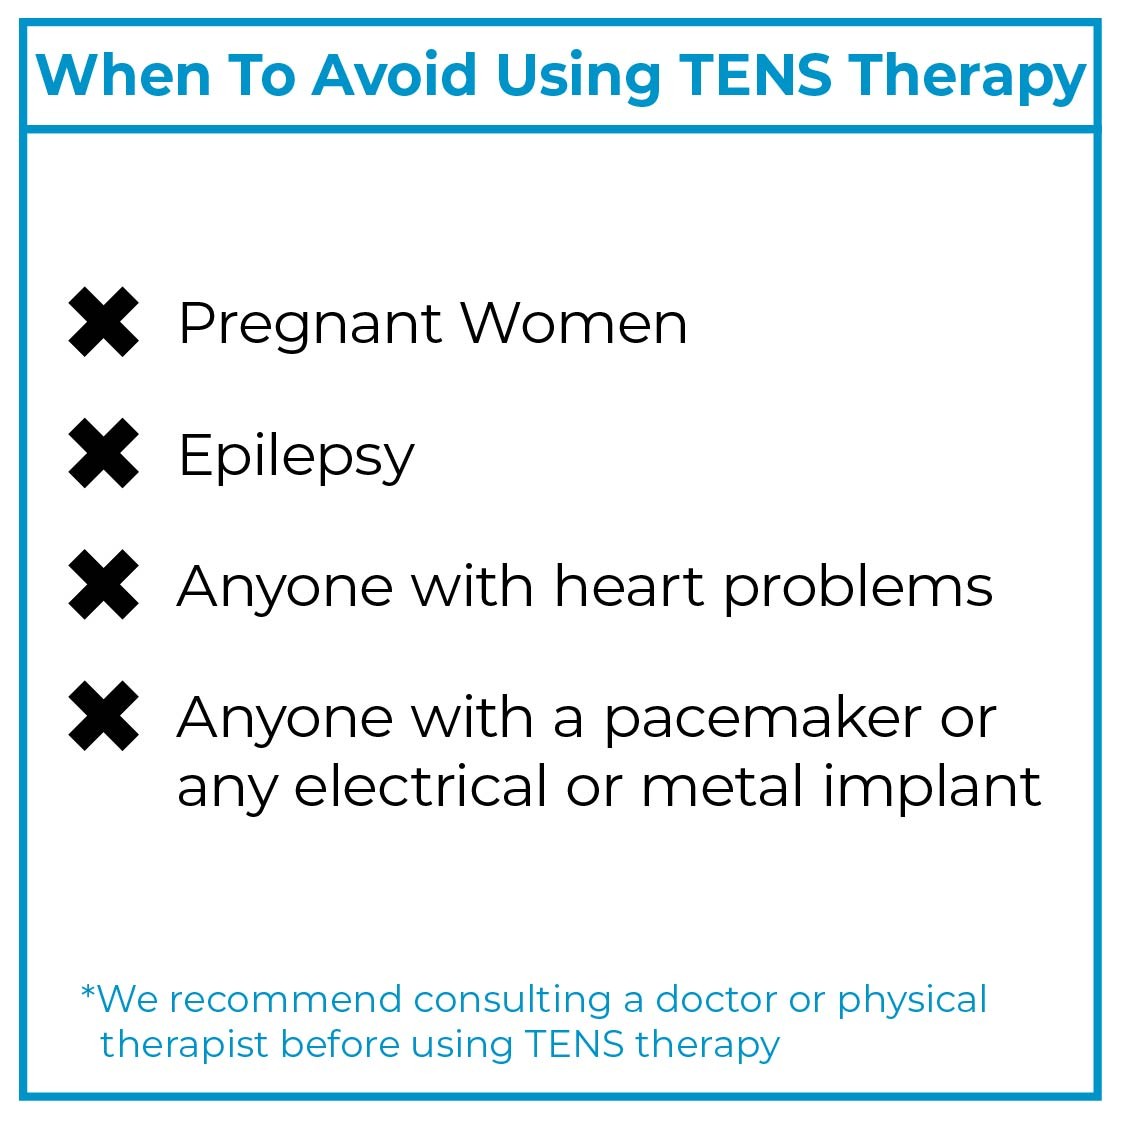 When to Avoid Using TENS Therapy